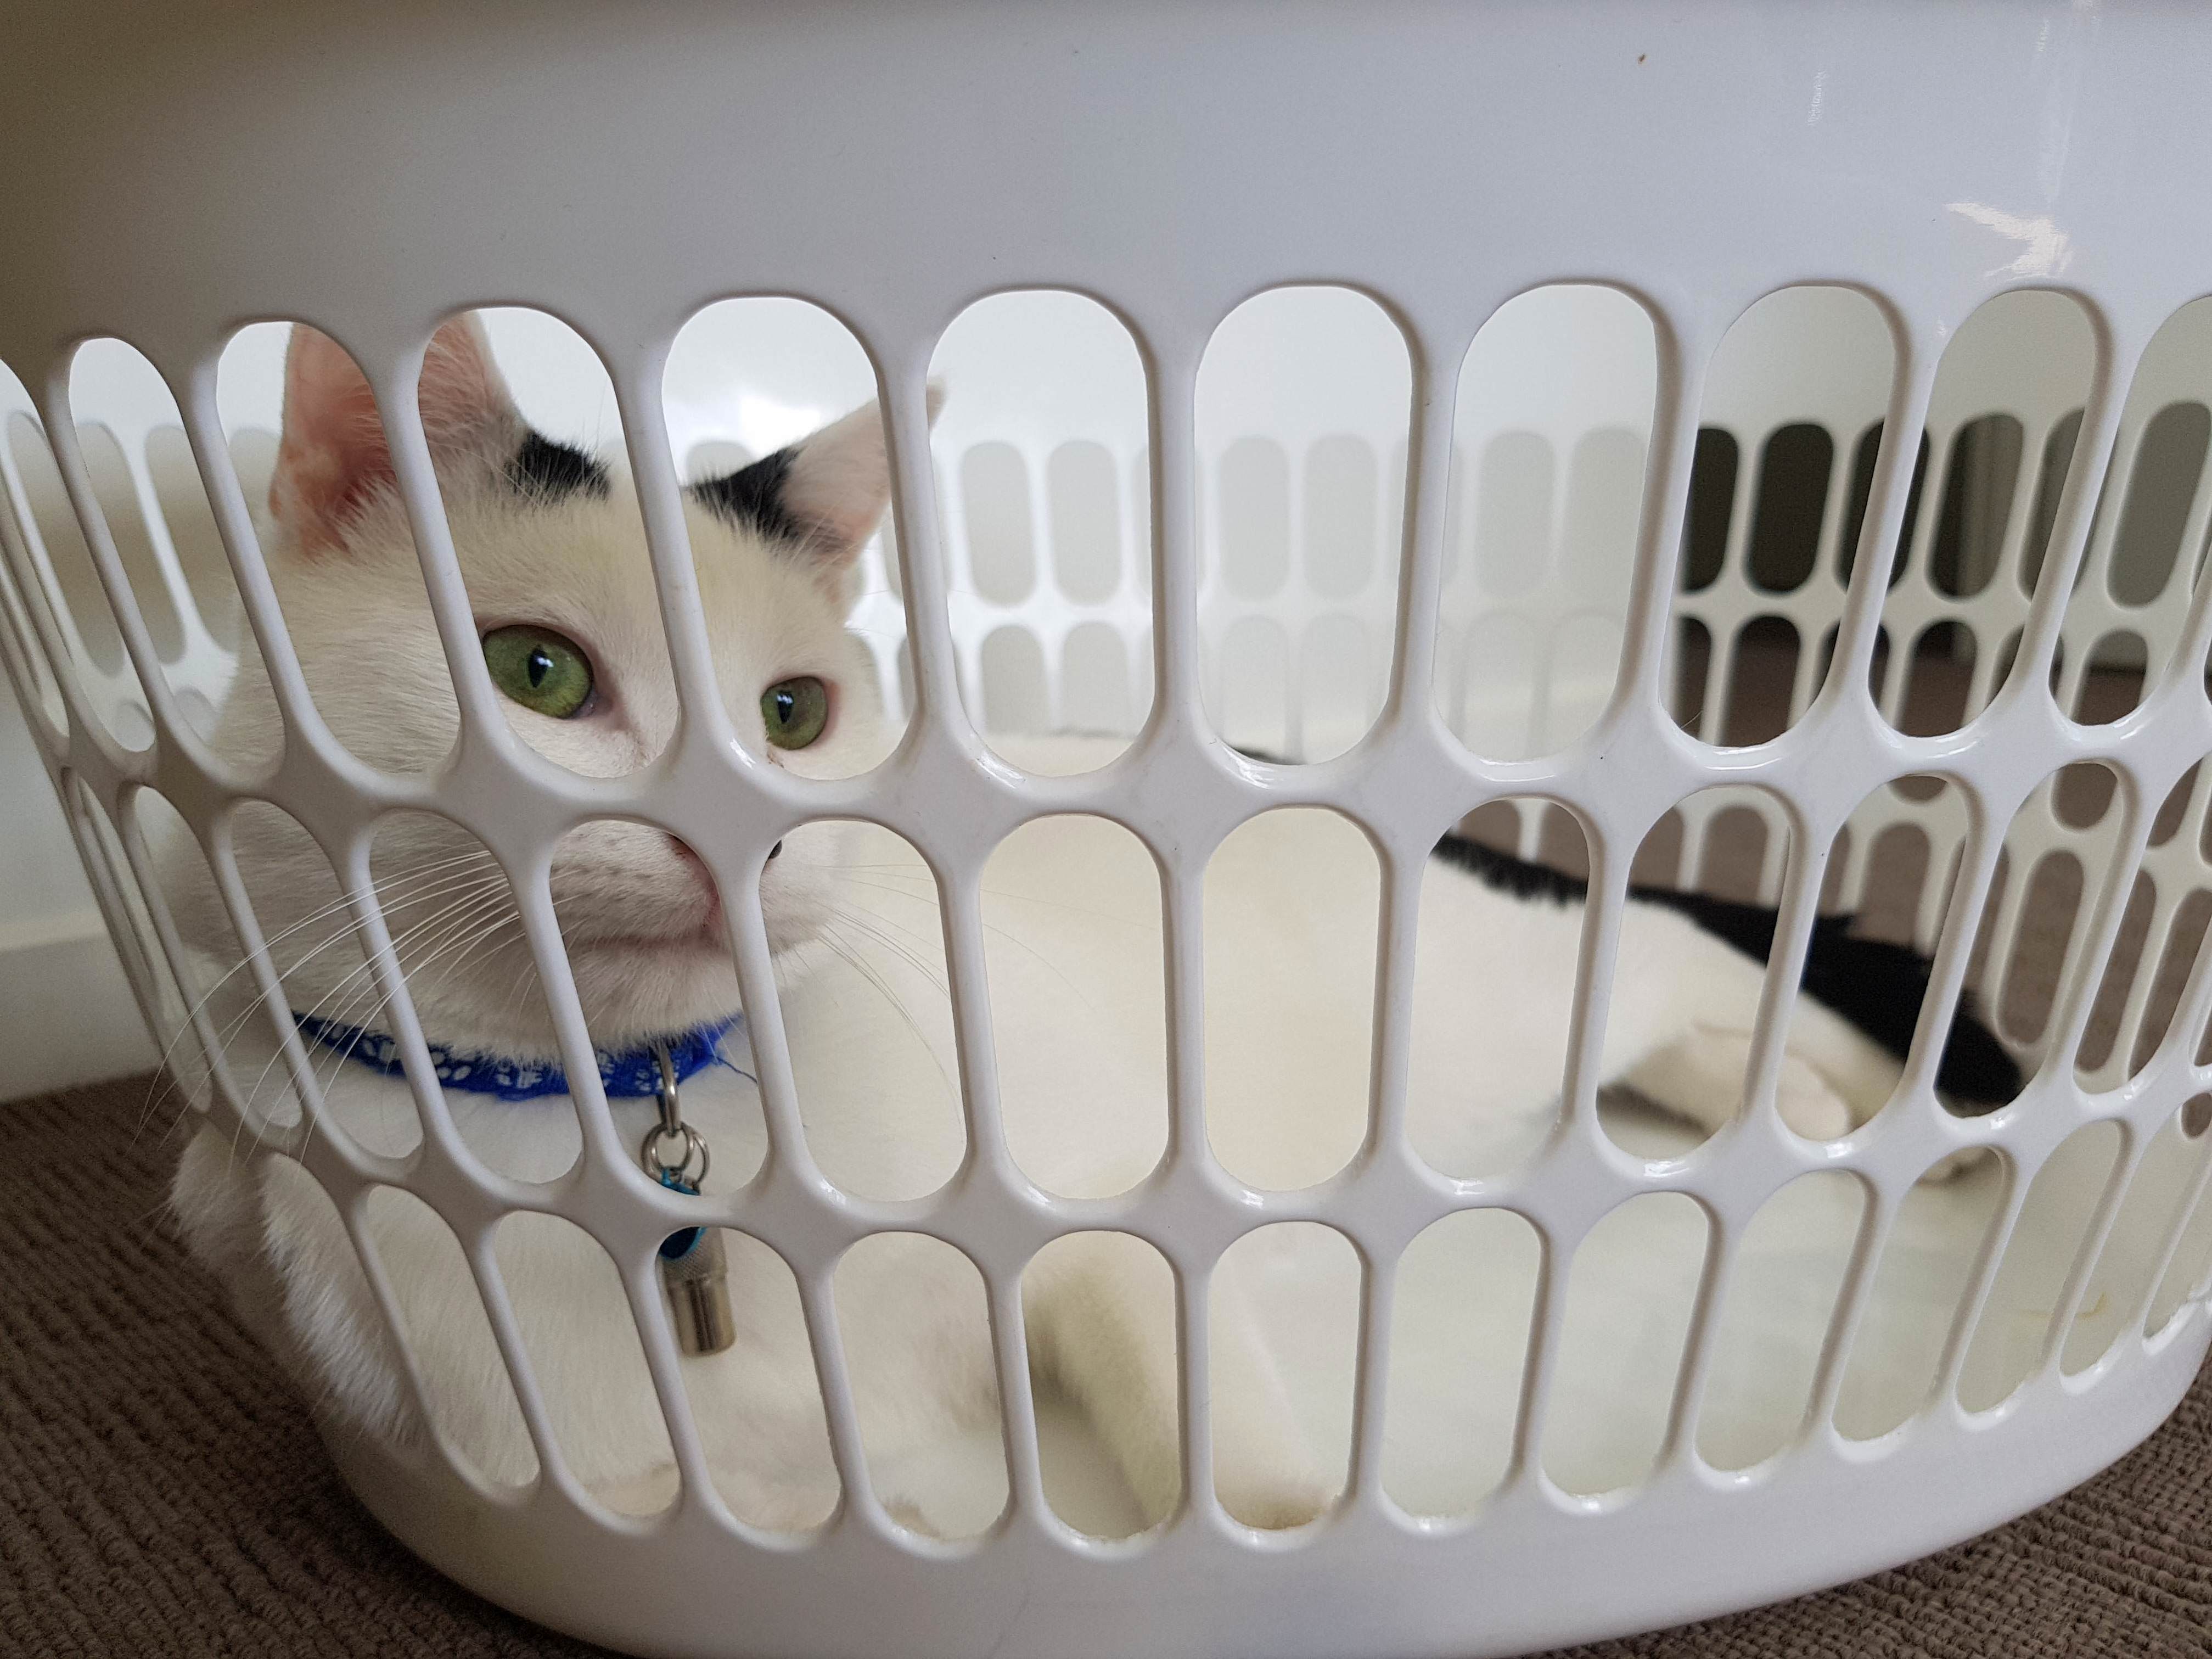 Anyone else have a cat obsesssed with laundry baskets